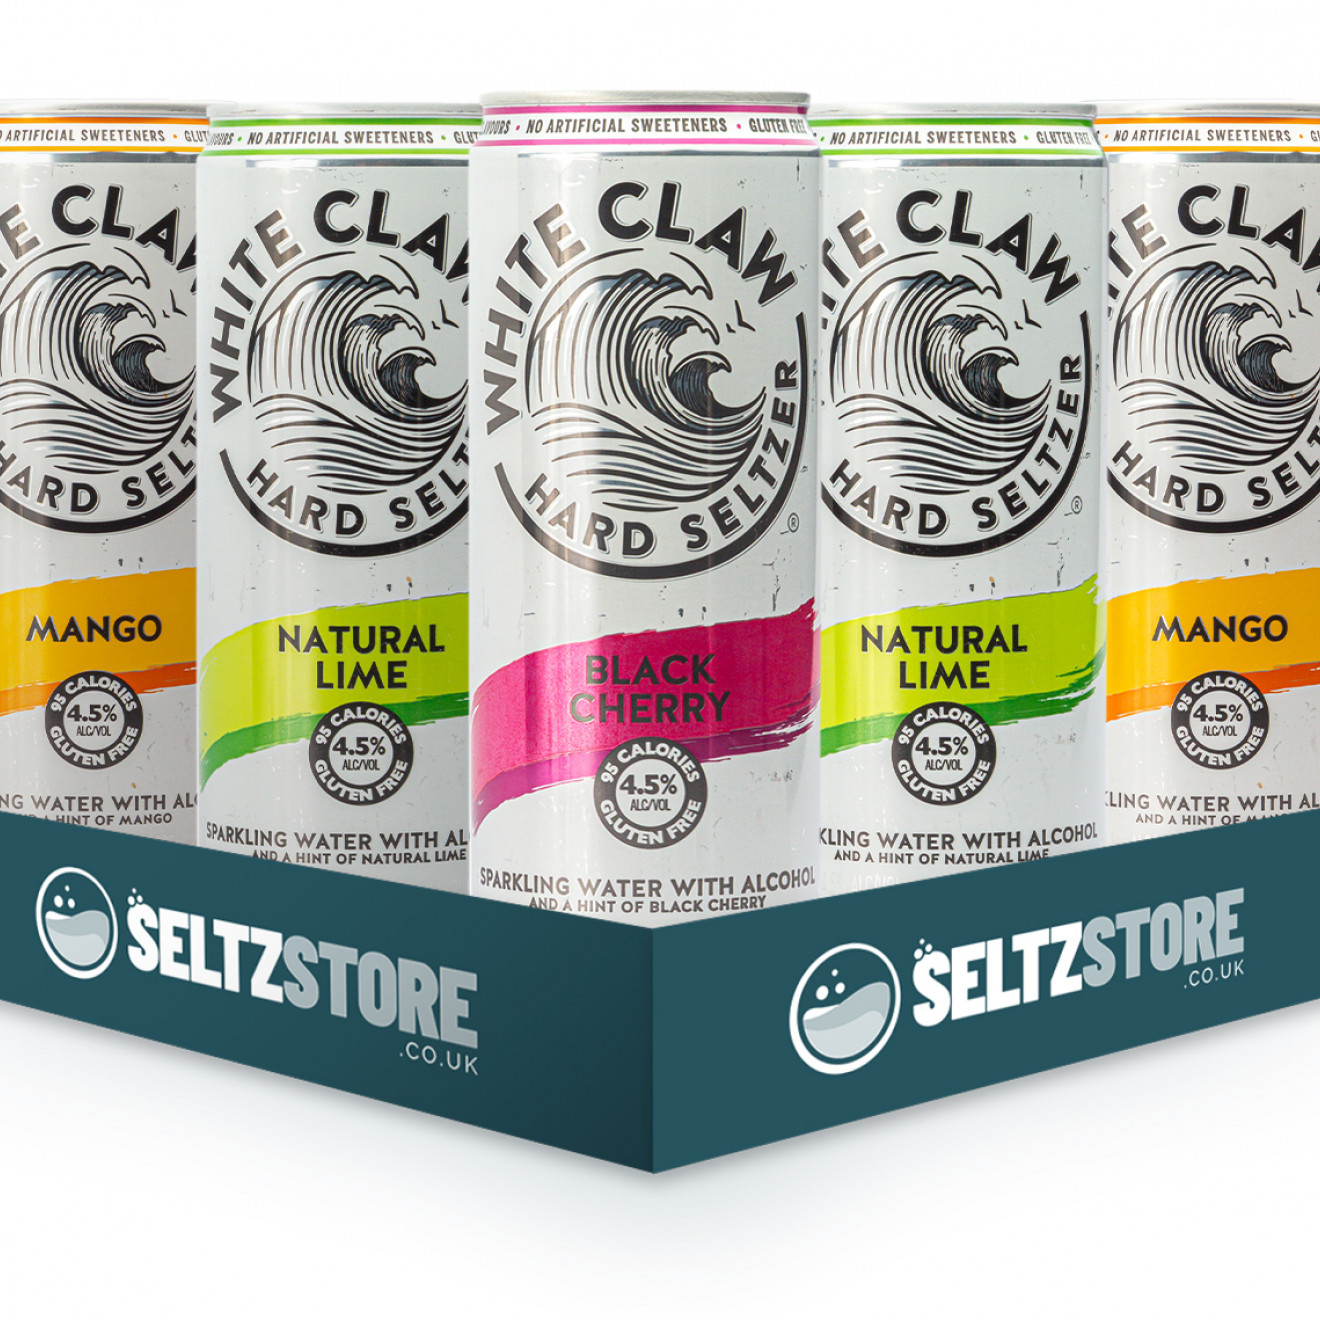 White Claw - Hard Seltzer Mixed Variety Pack